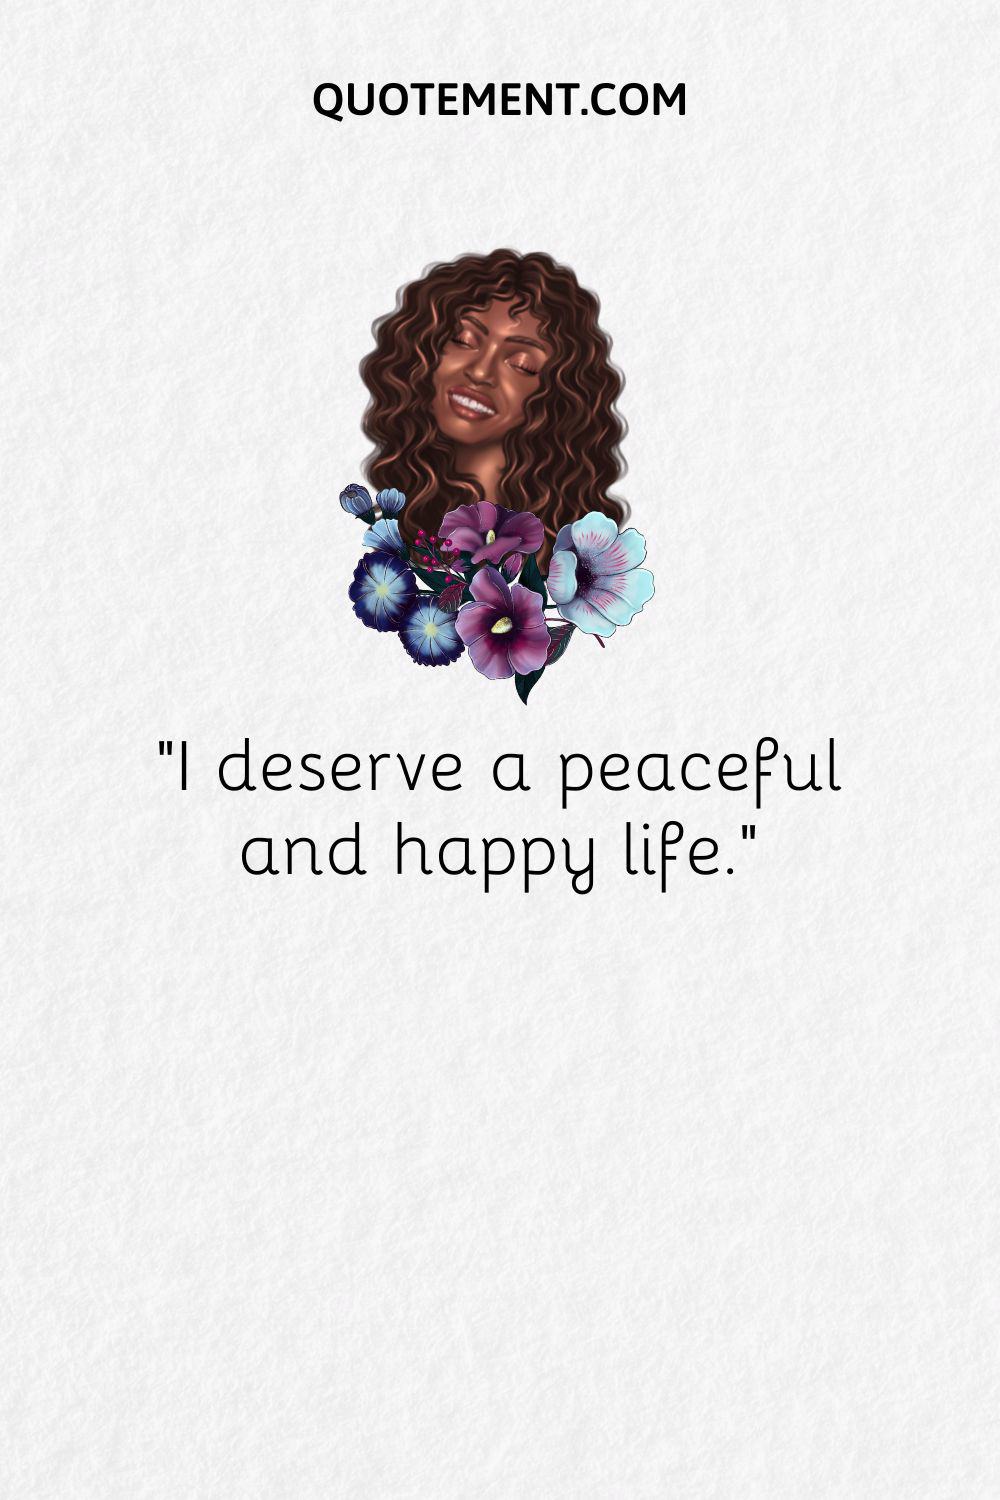 I deserve a peaceful and happy life